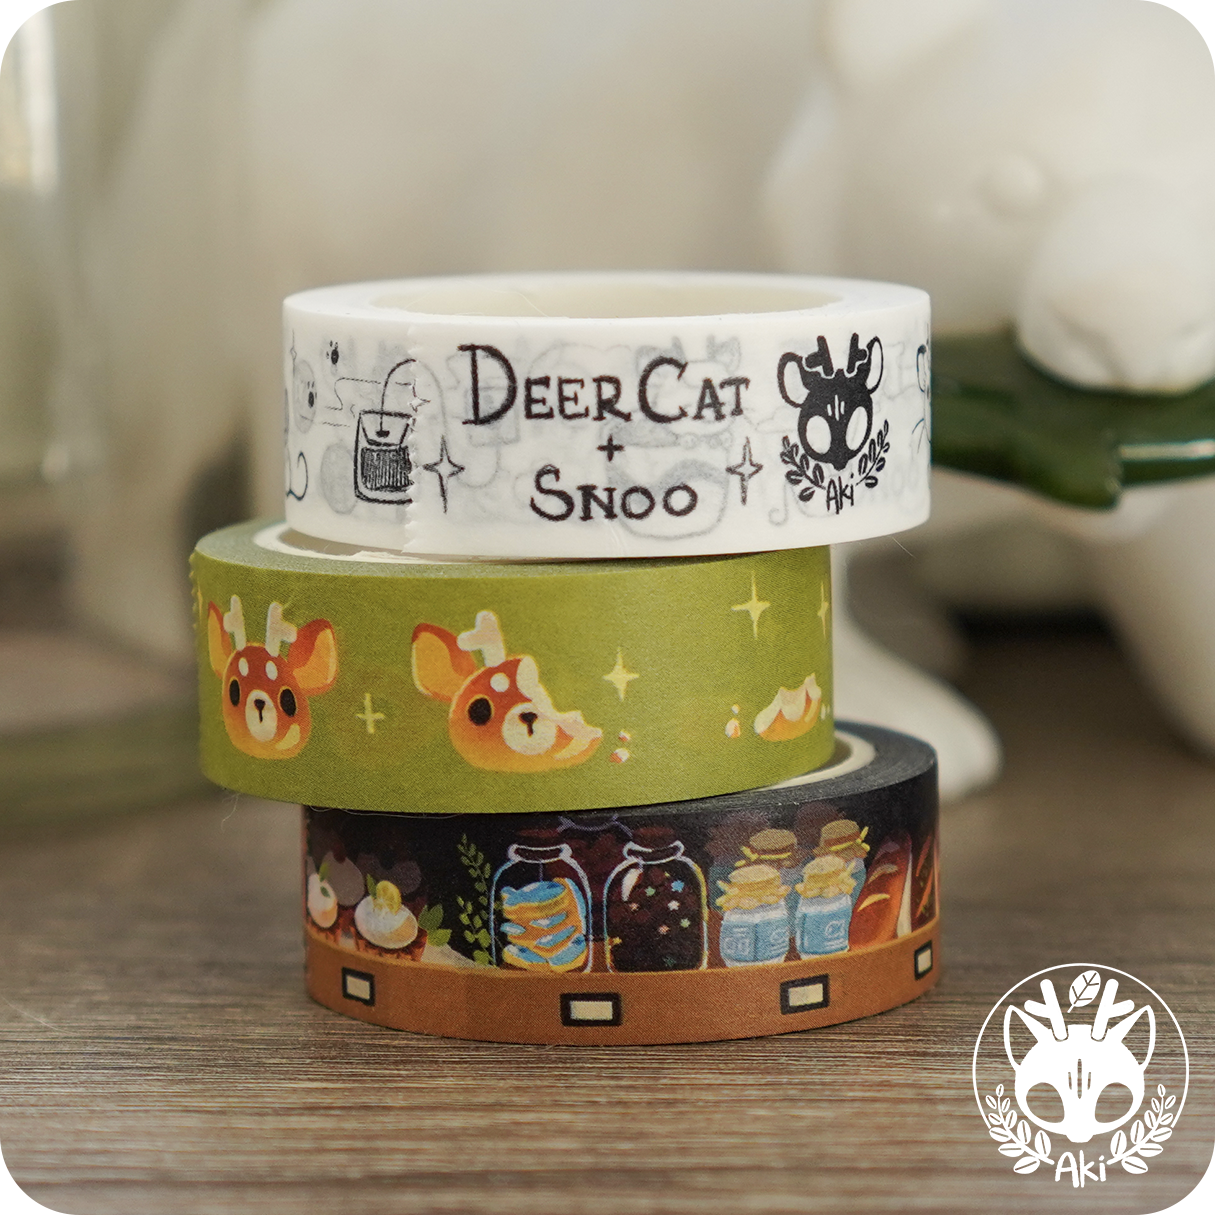 DeerCat Cafe - Washi Tape featuring a stack of tape rolls with cartoon animals and images on them.